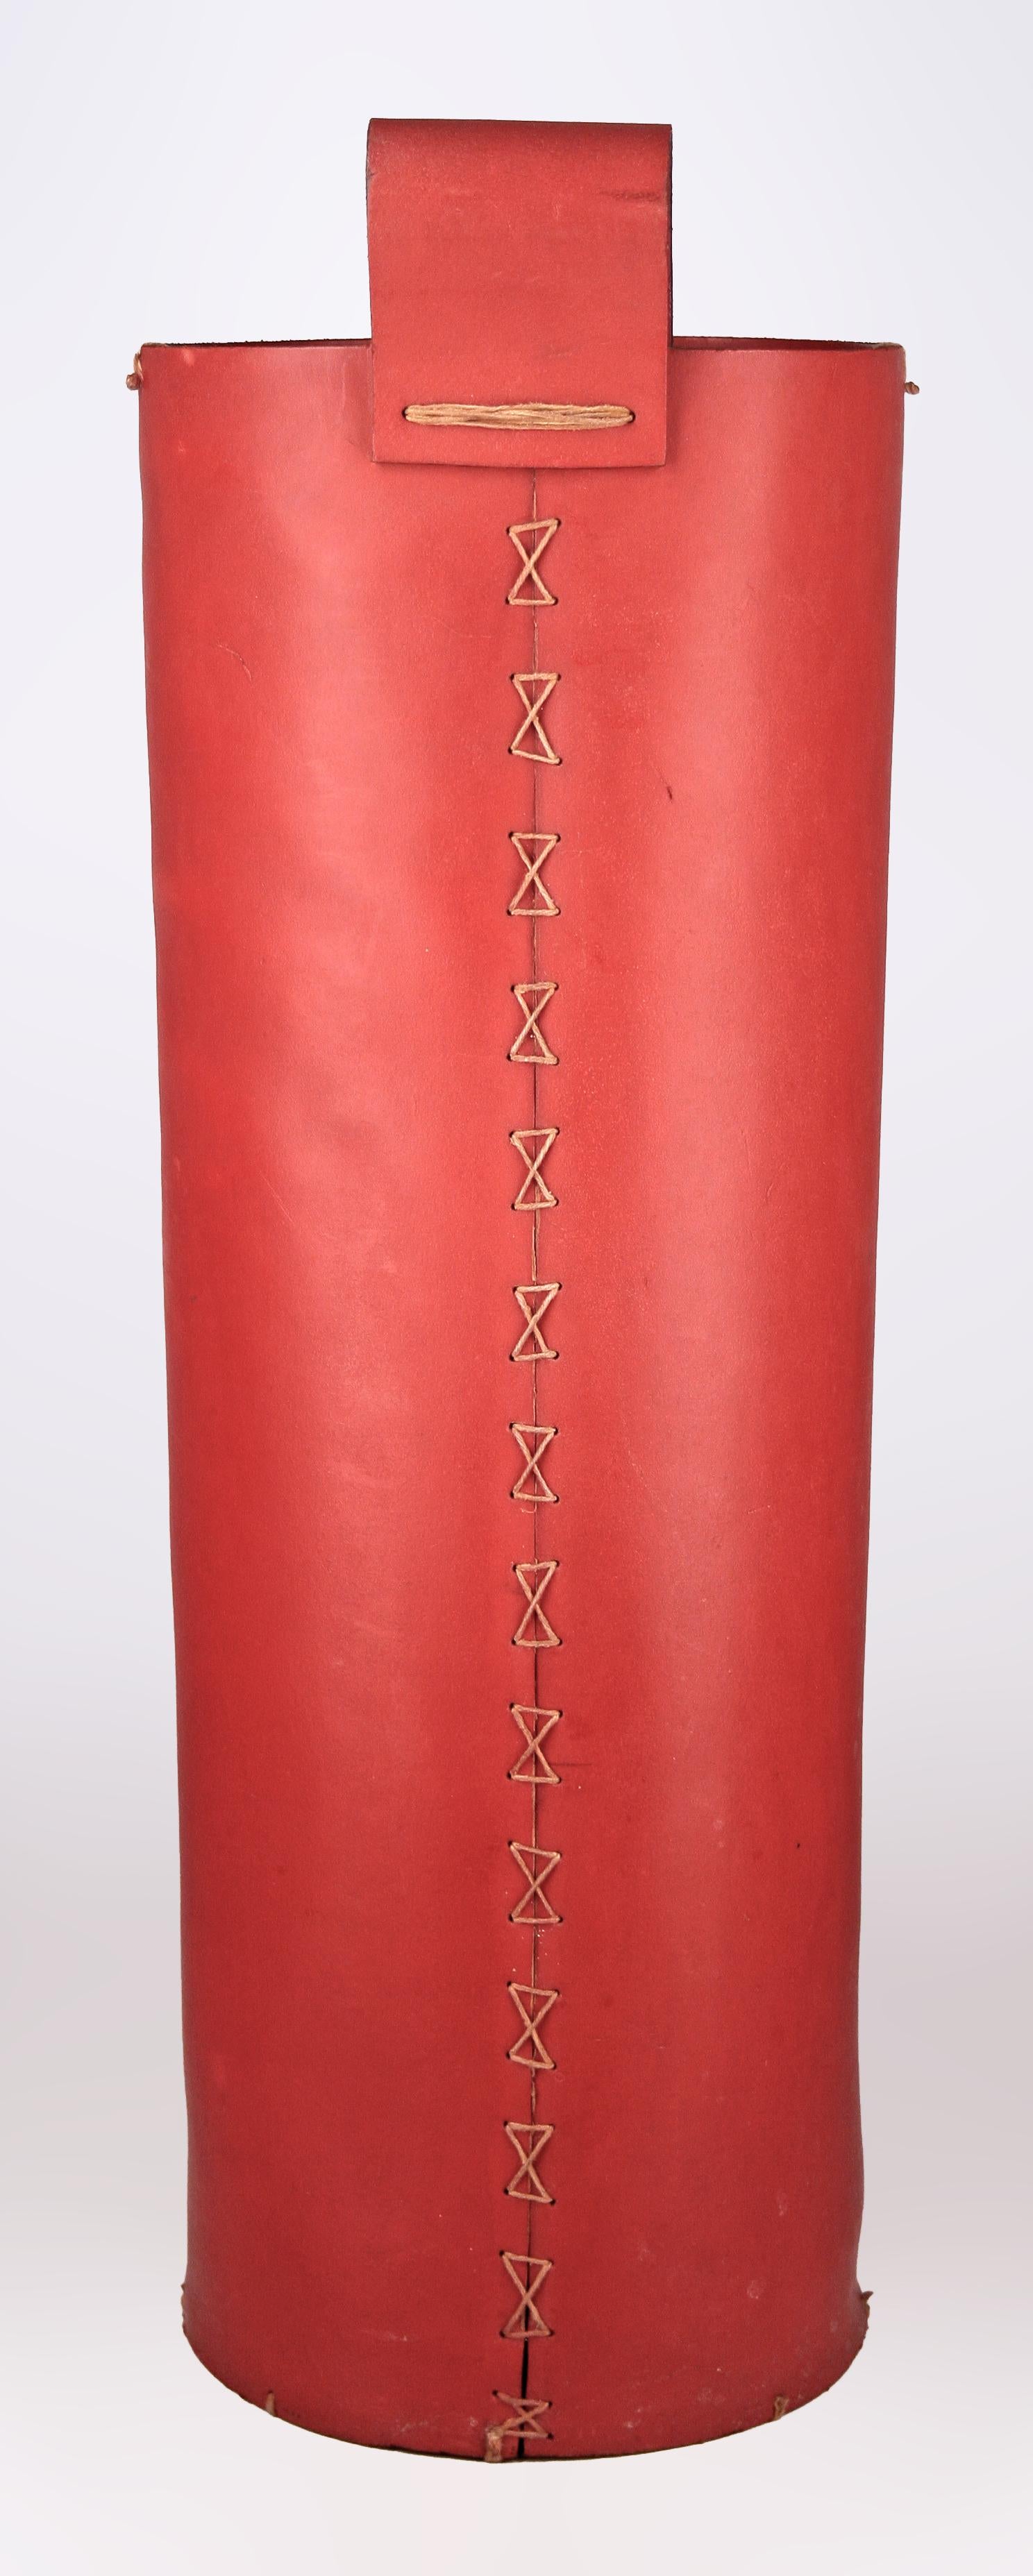 Carved Mid-20th C. Modern French Red Leather Cylindrical Umbrella Stand by Hermès Paris For Sale